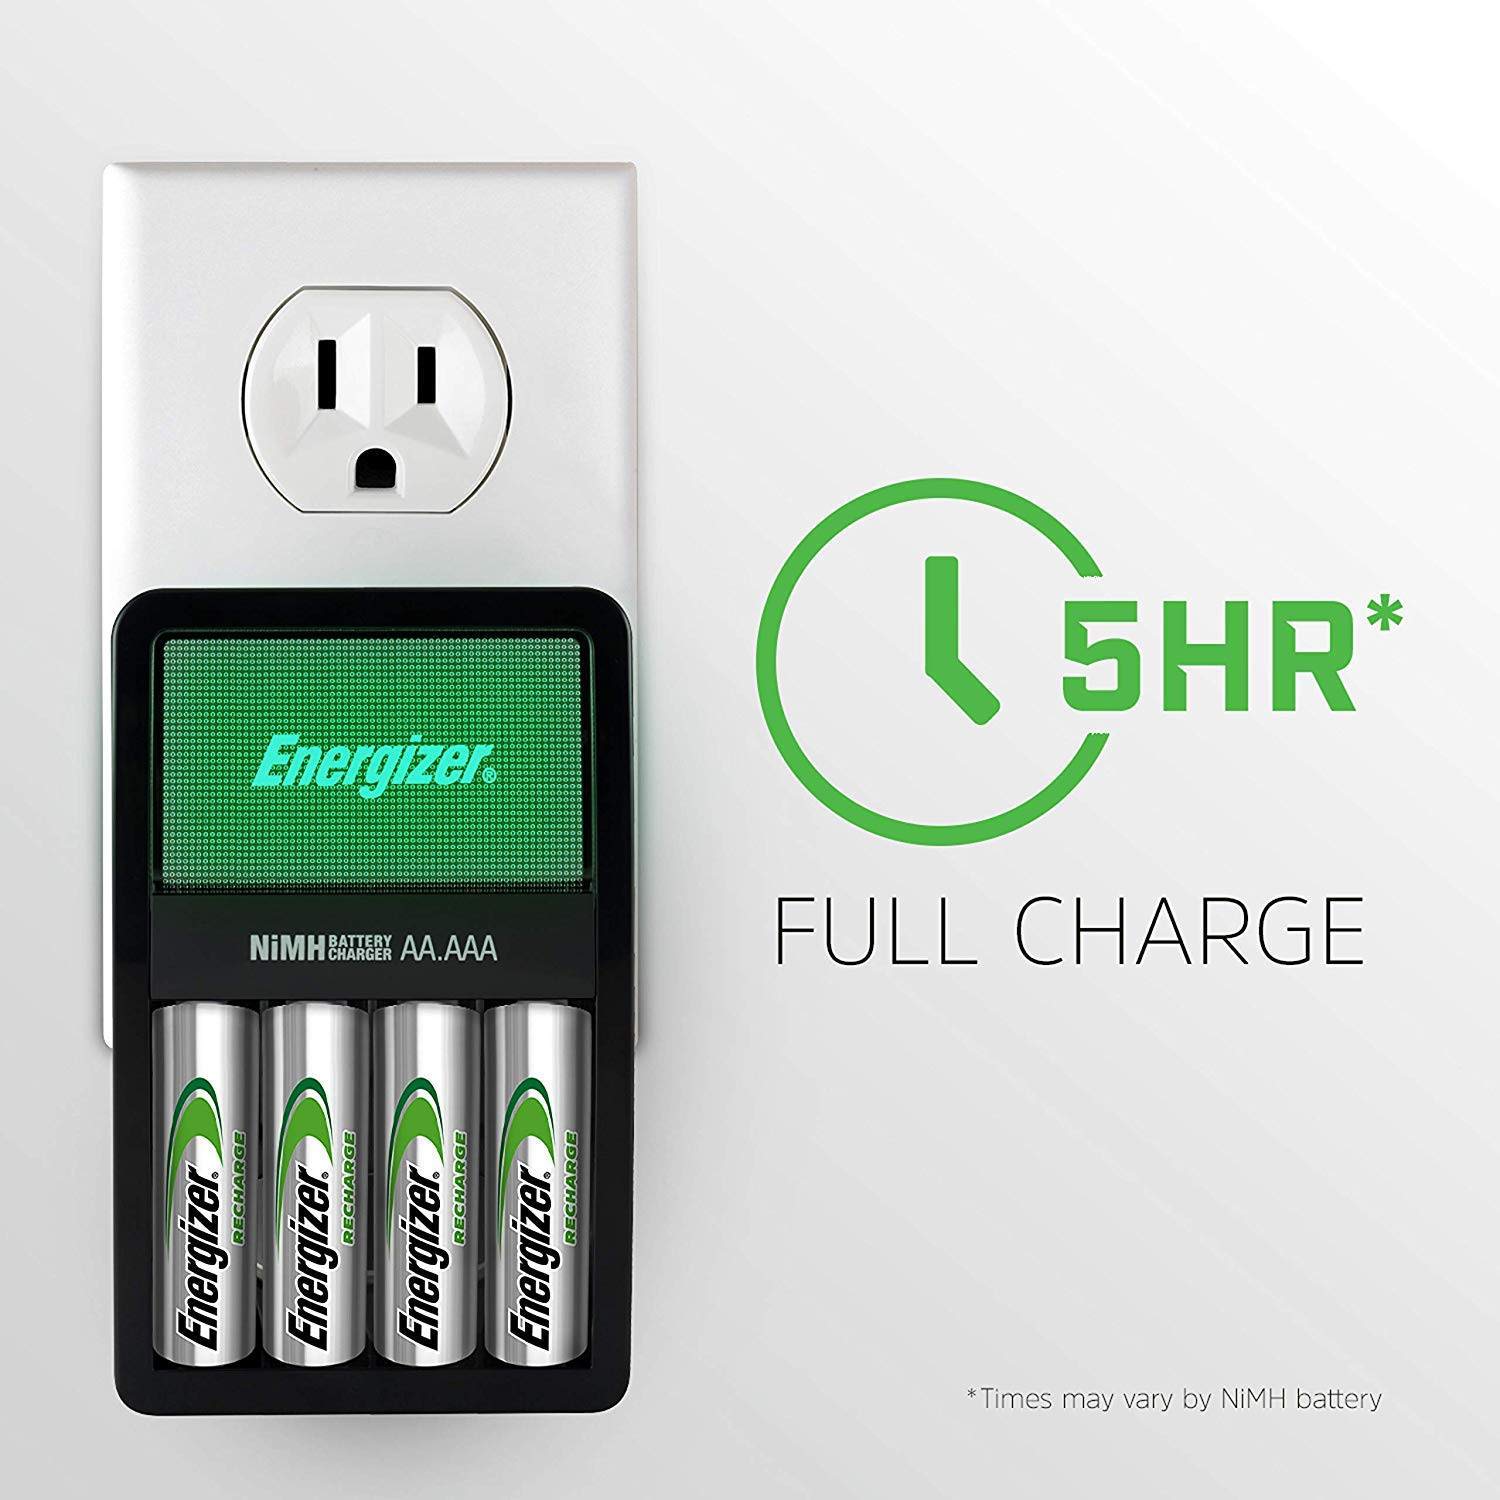 rechargeable batteries by energizer